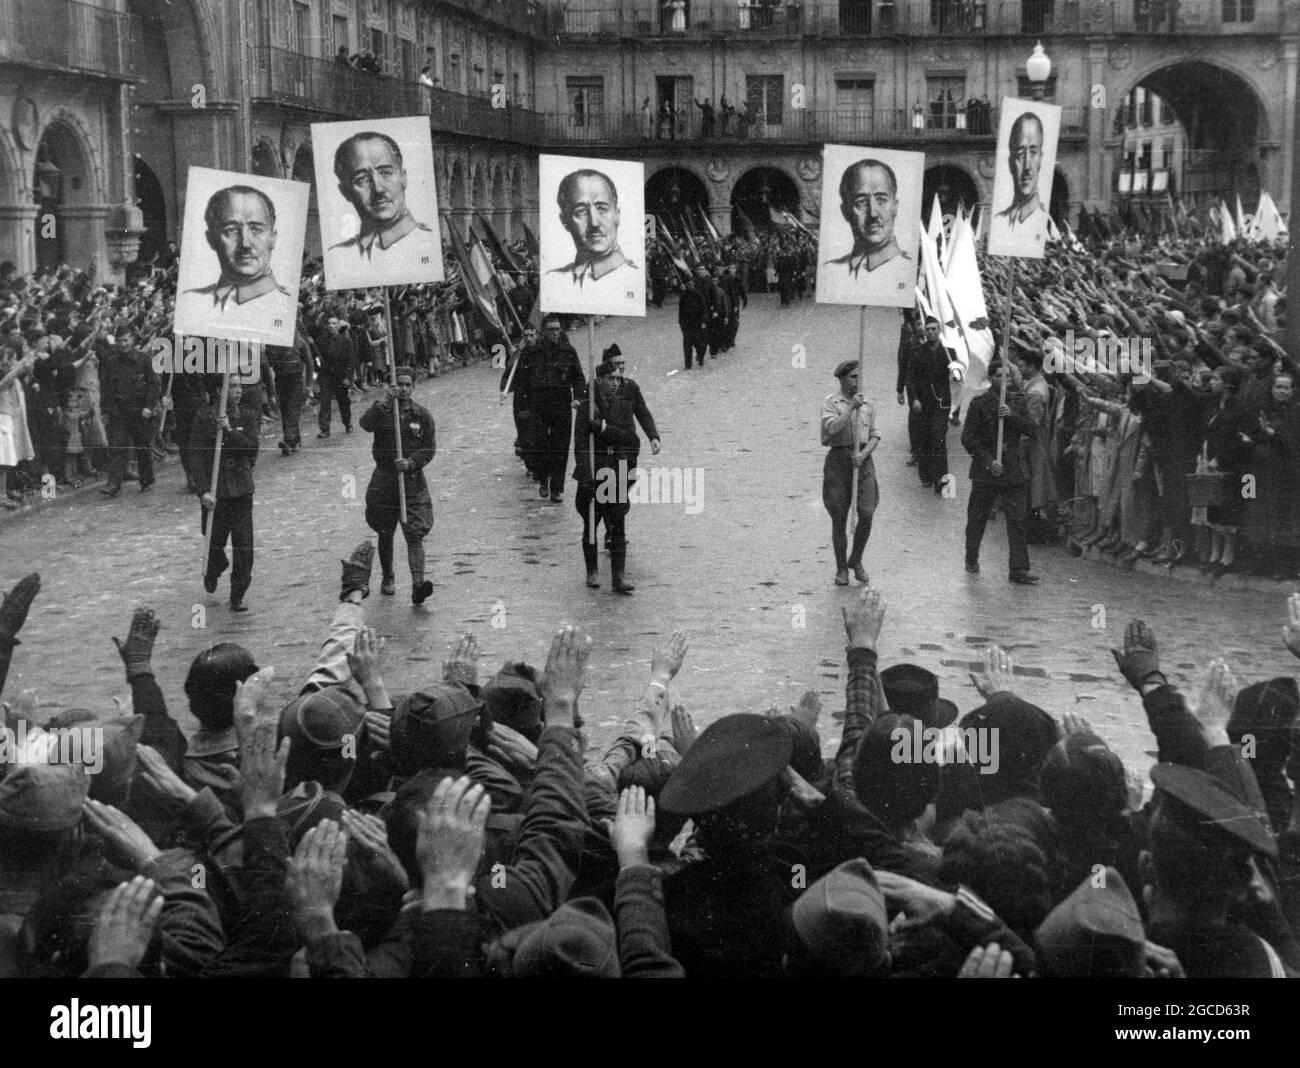 SALAMANCA, SPAIN - 1937 - A fascist parade in Salamanca, Spain, to celebrate the occupation of Gijón by Francoist troops - Photo: Geopix Stock Photo